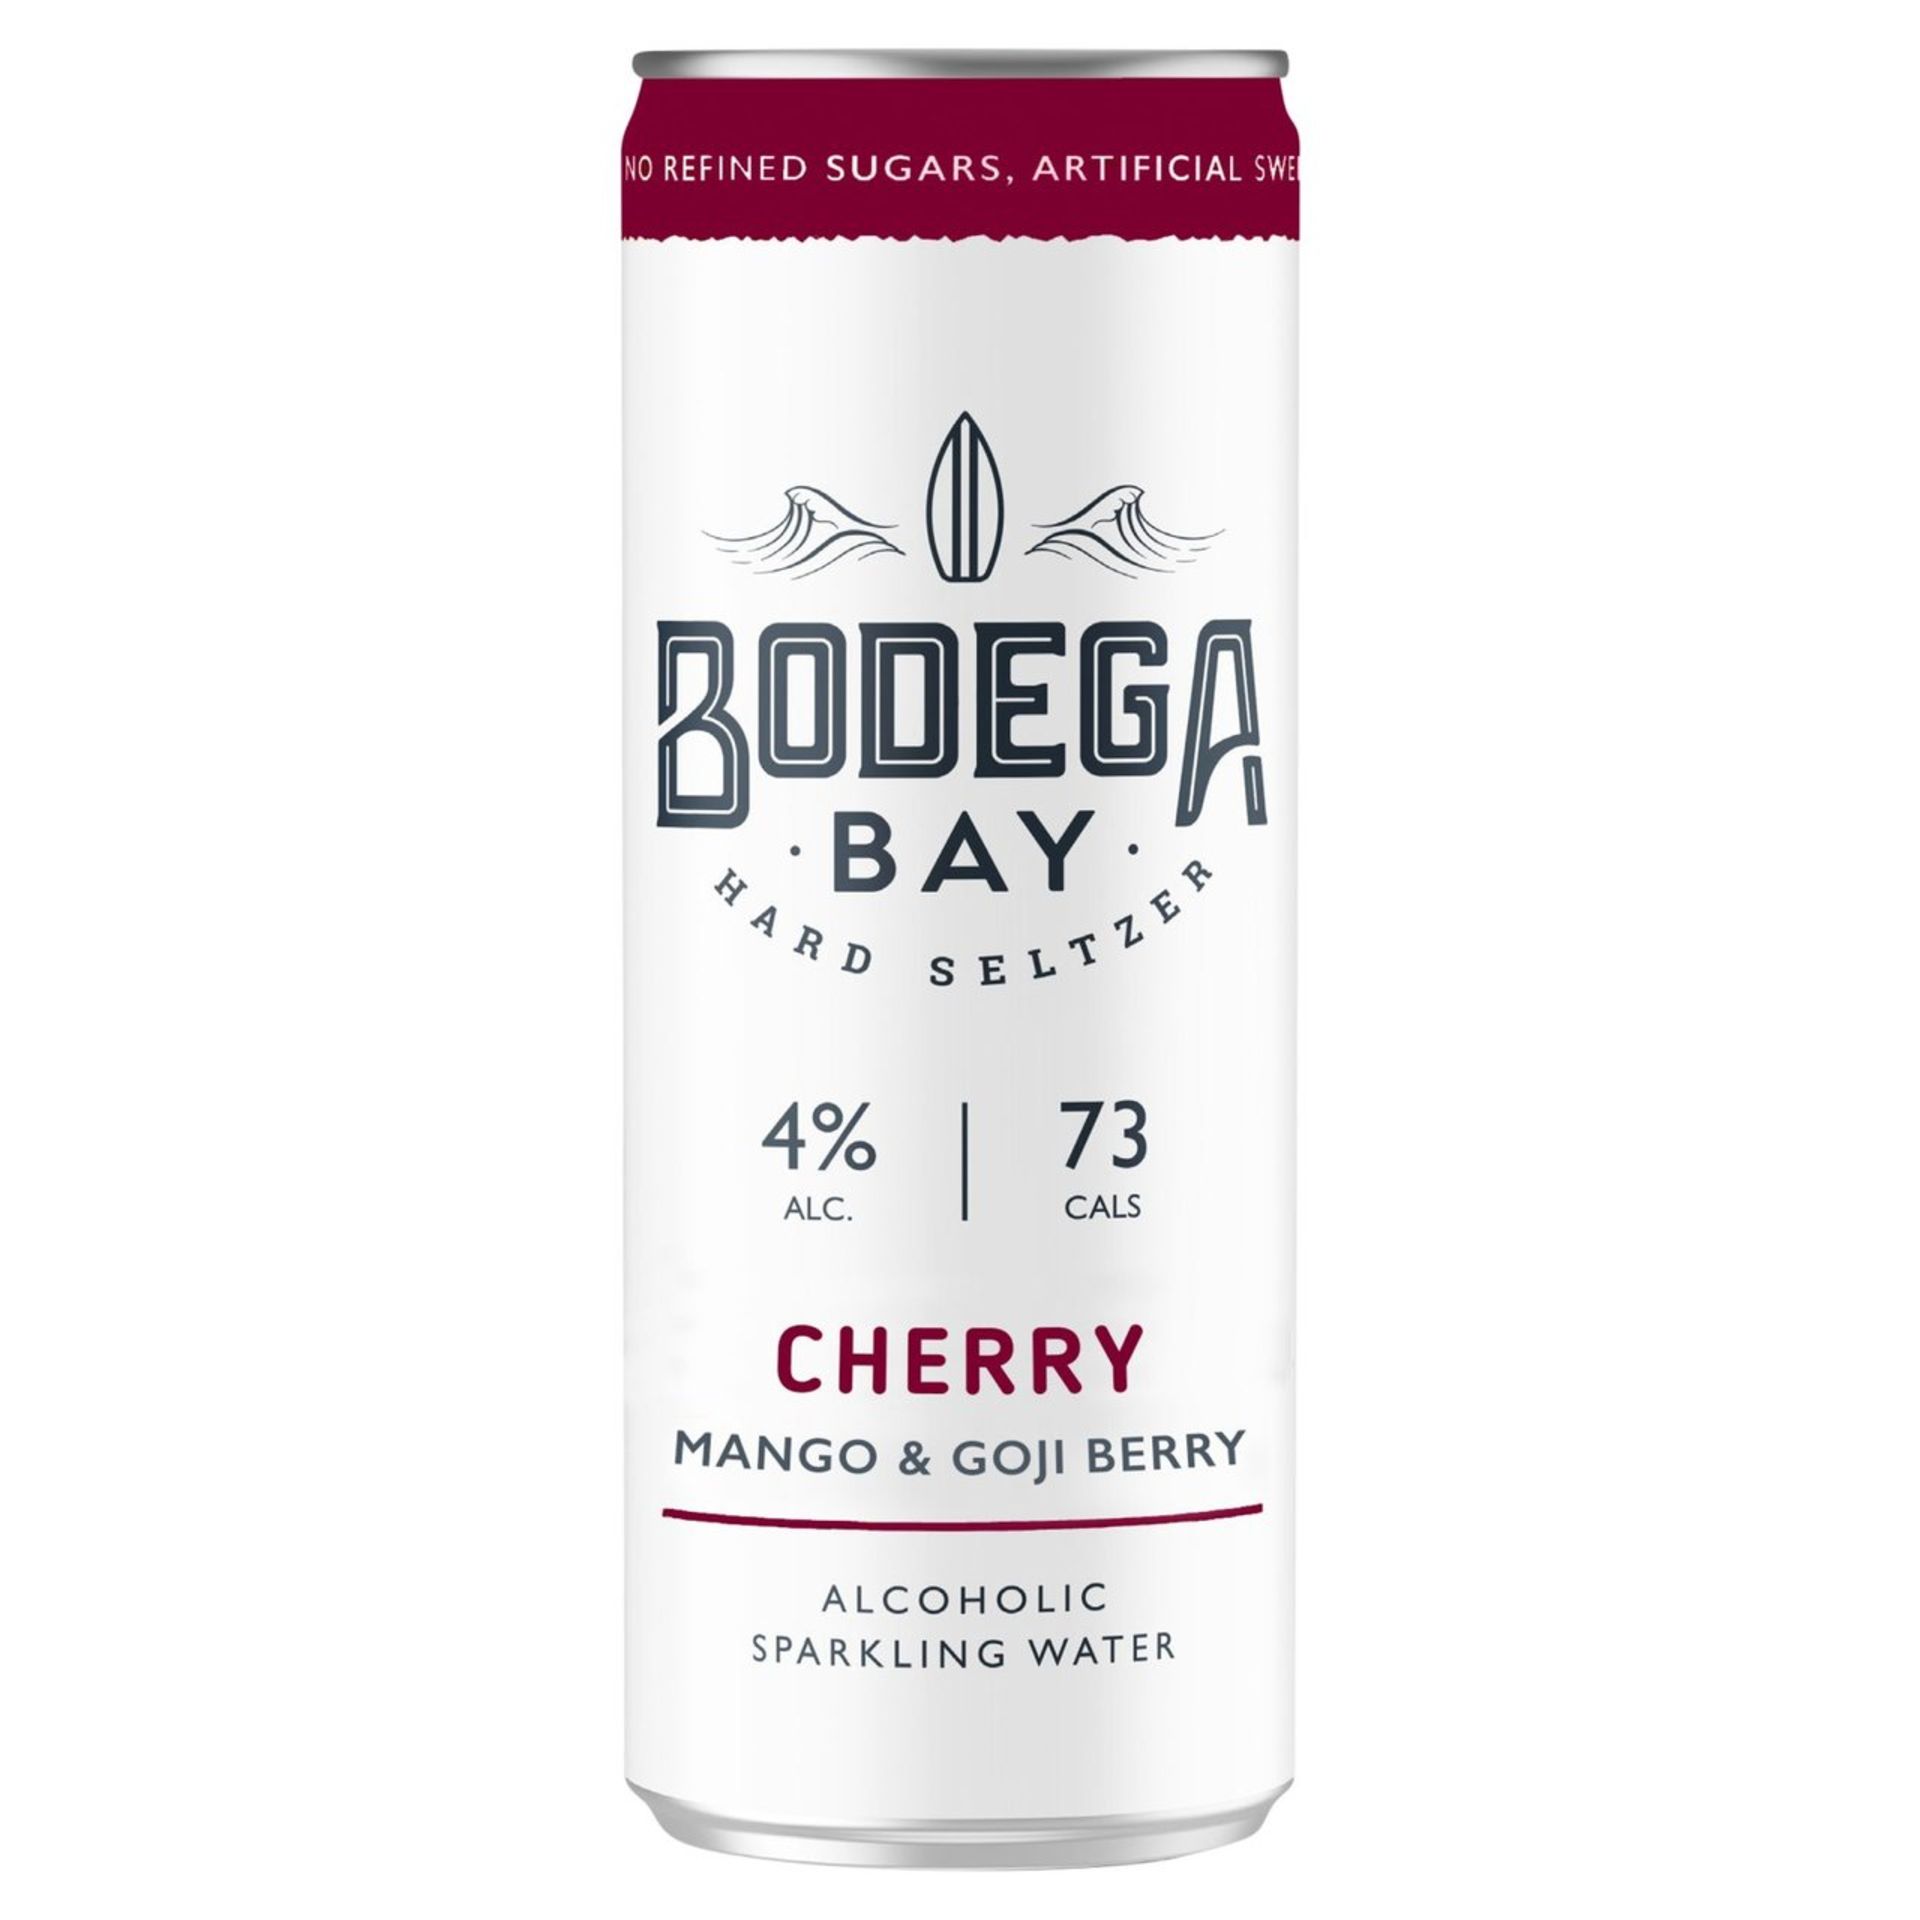 1,080 x Cans of Bodega Bay Hard Seltzer 250ml Alcoholic Sparkling Water Drinks - RESALE JOB LOT - Image 2 of 30